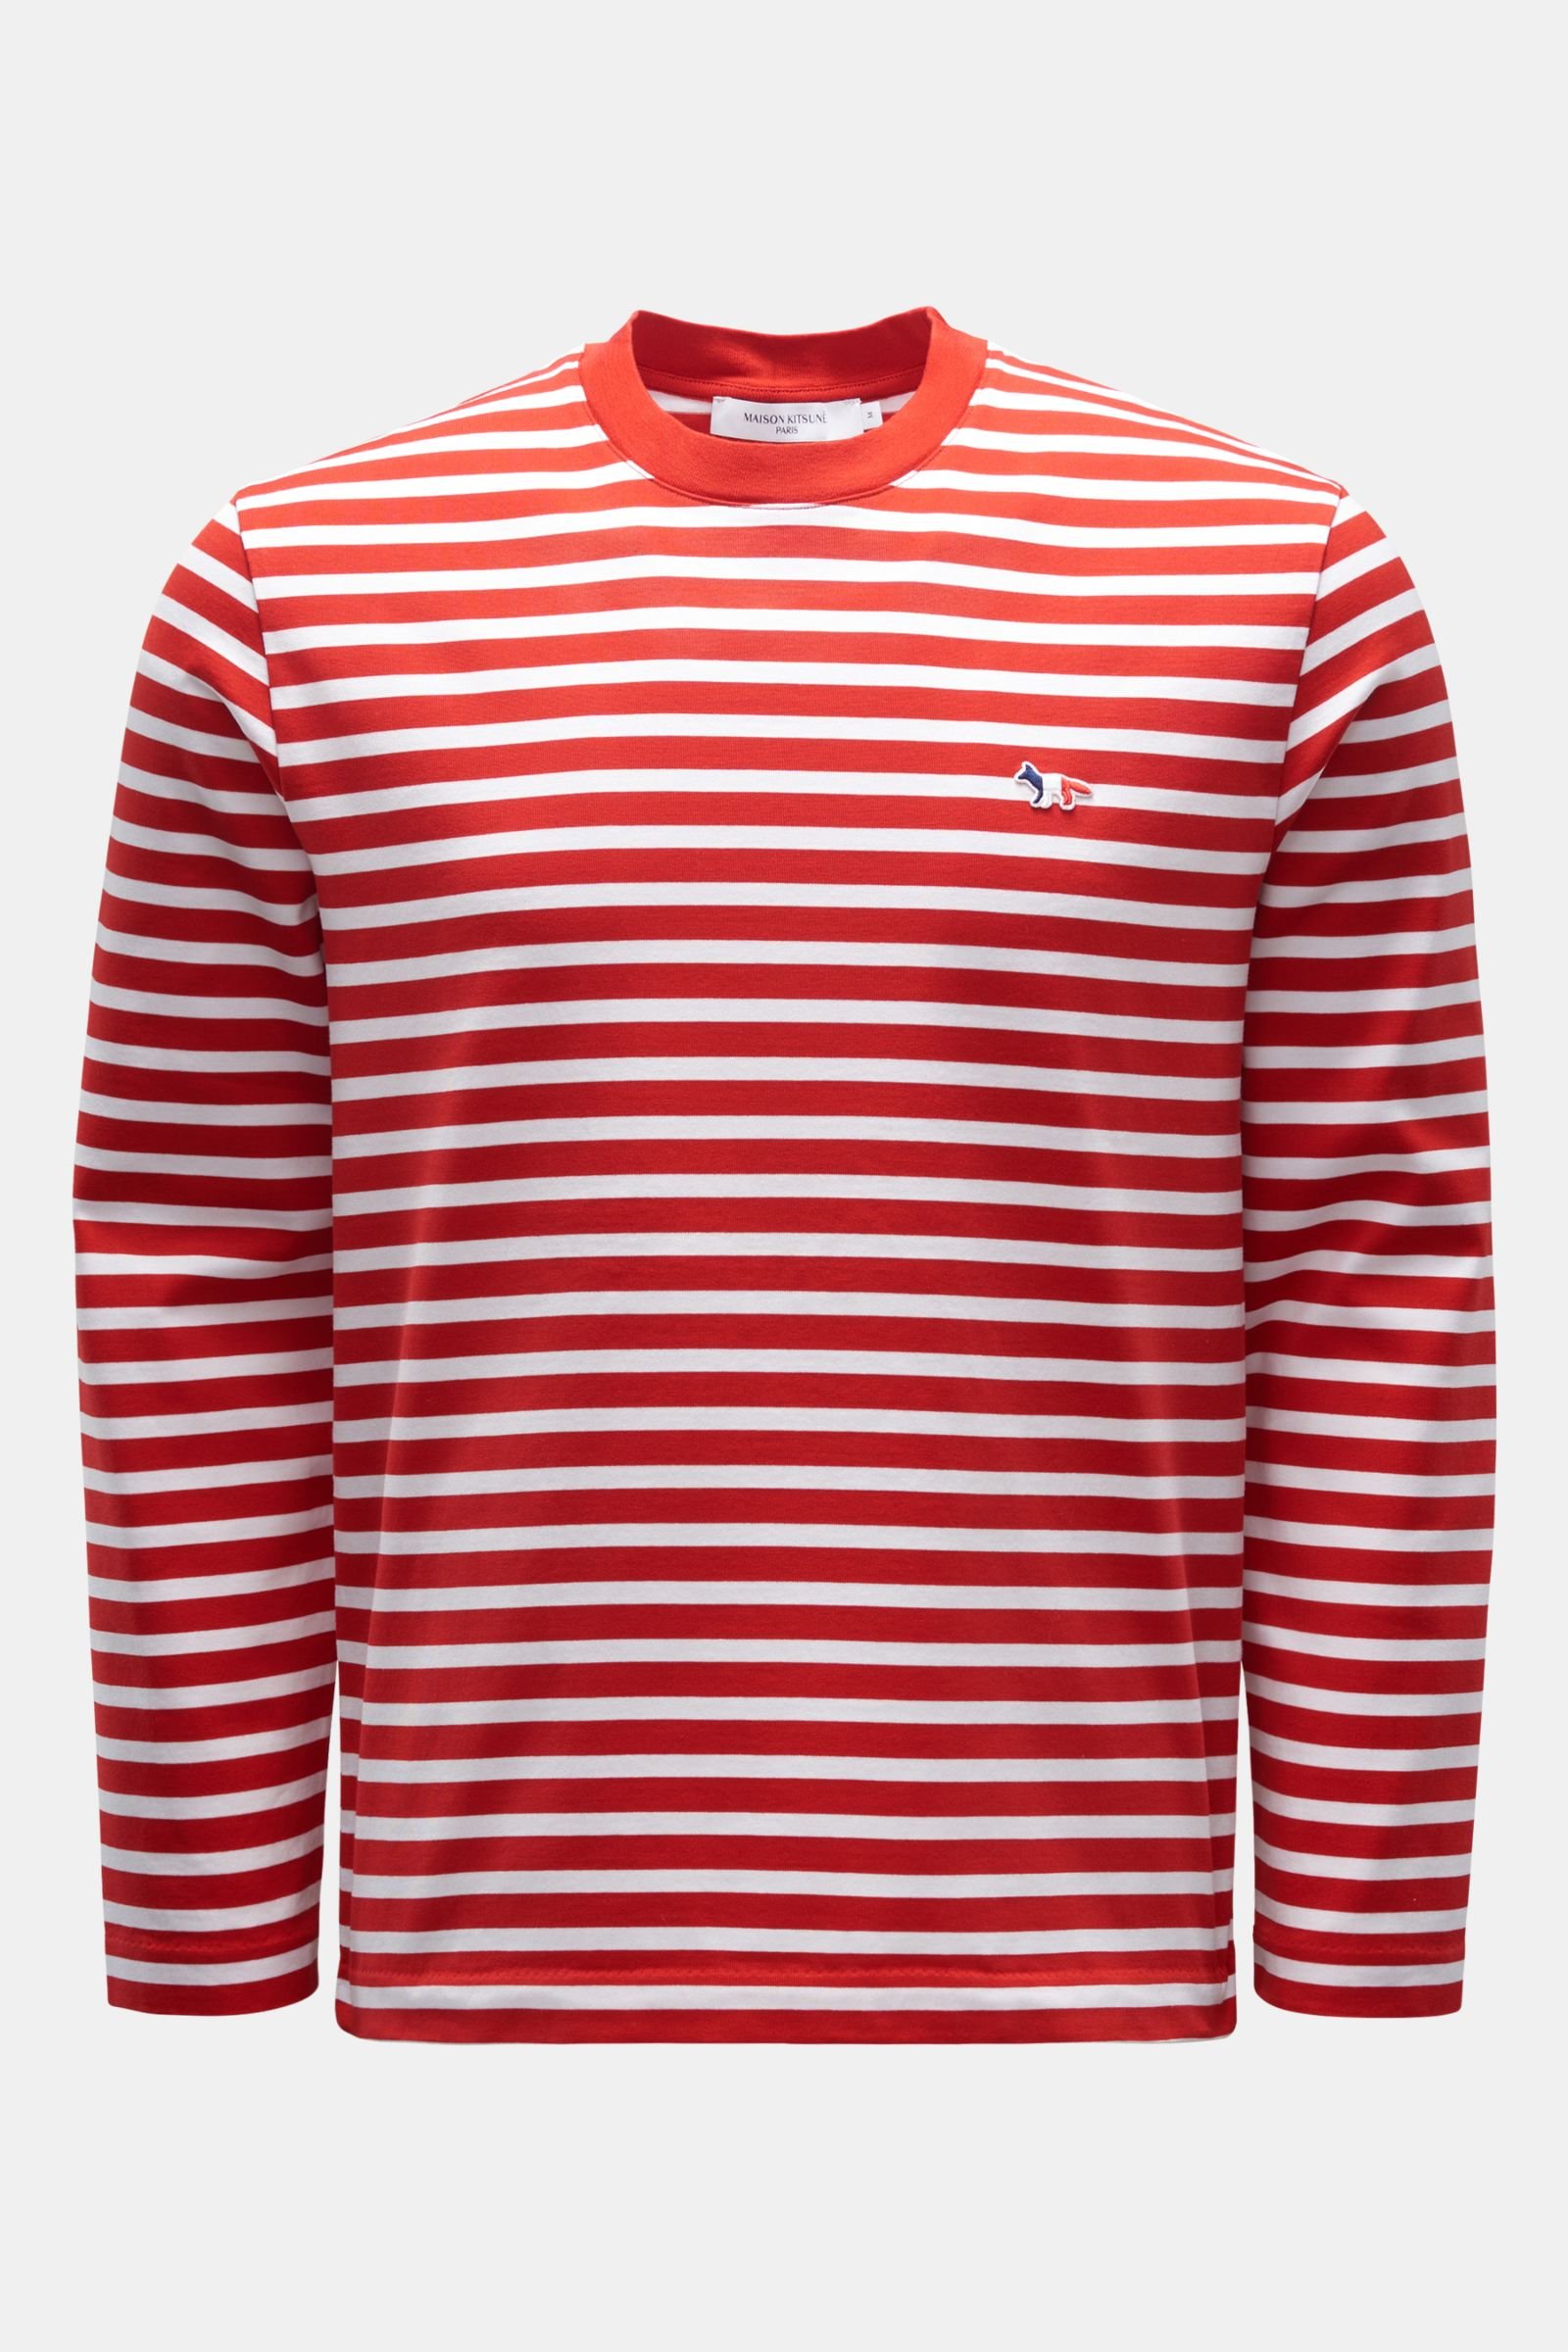 Long sleeve top 'Tricolor' red/white striped